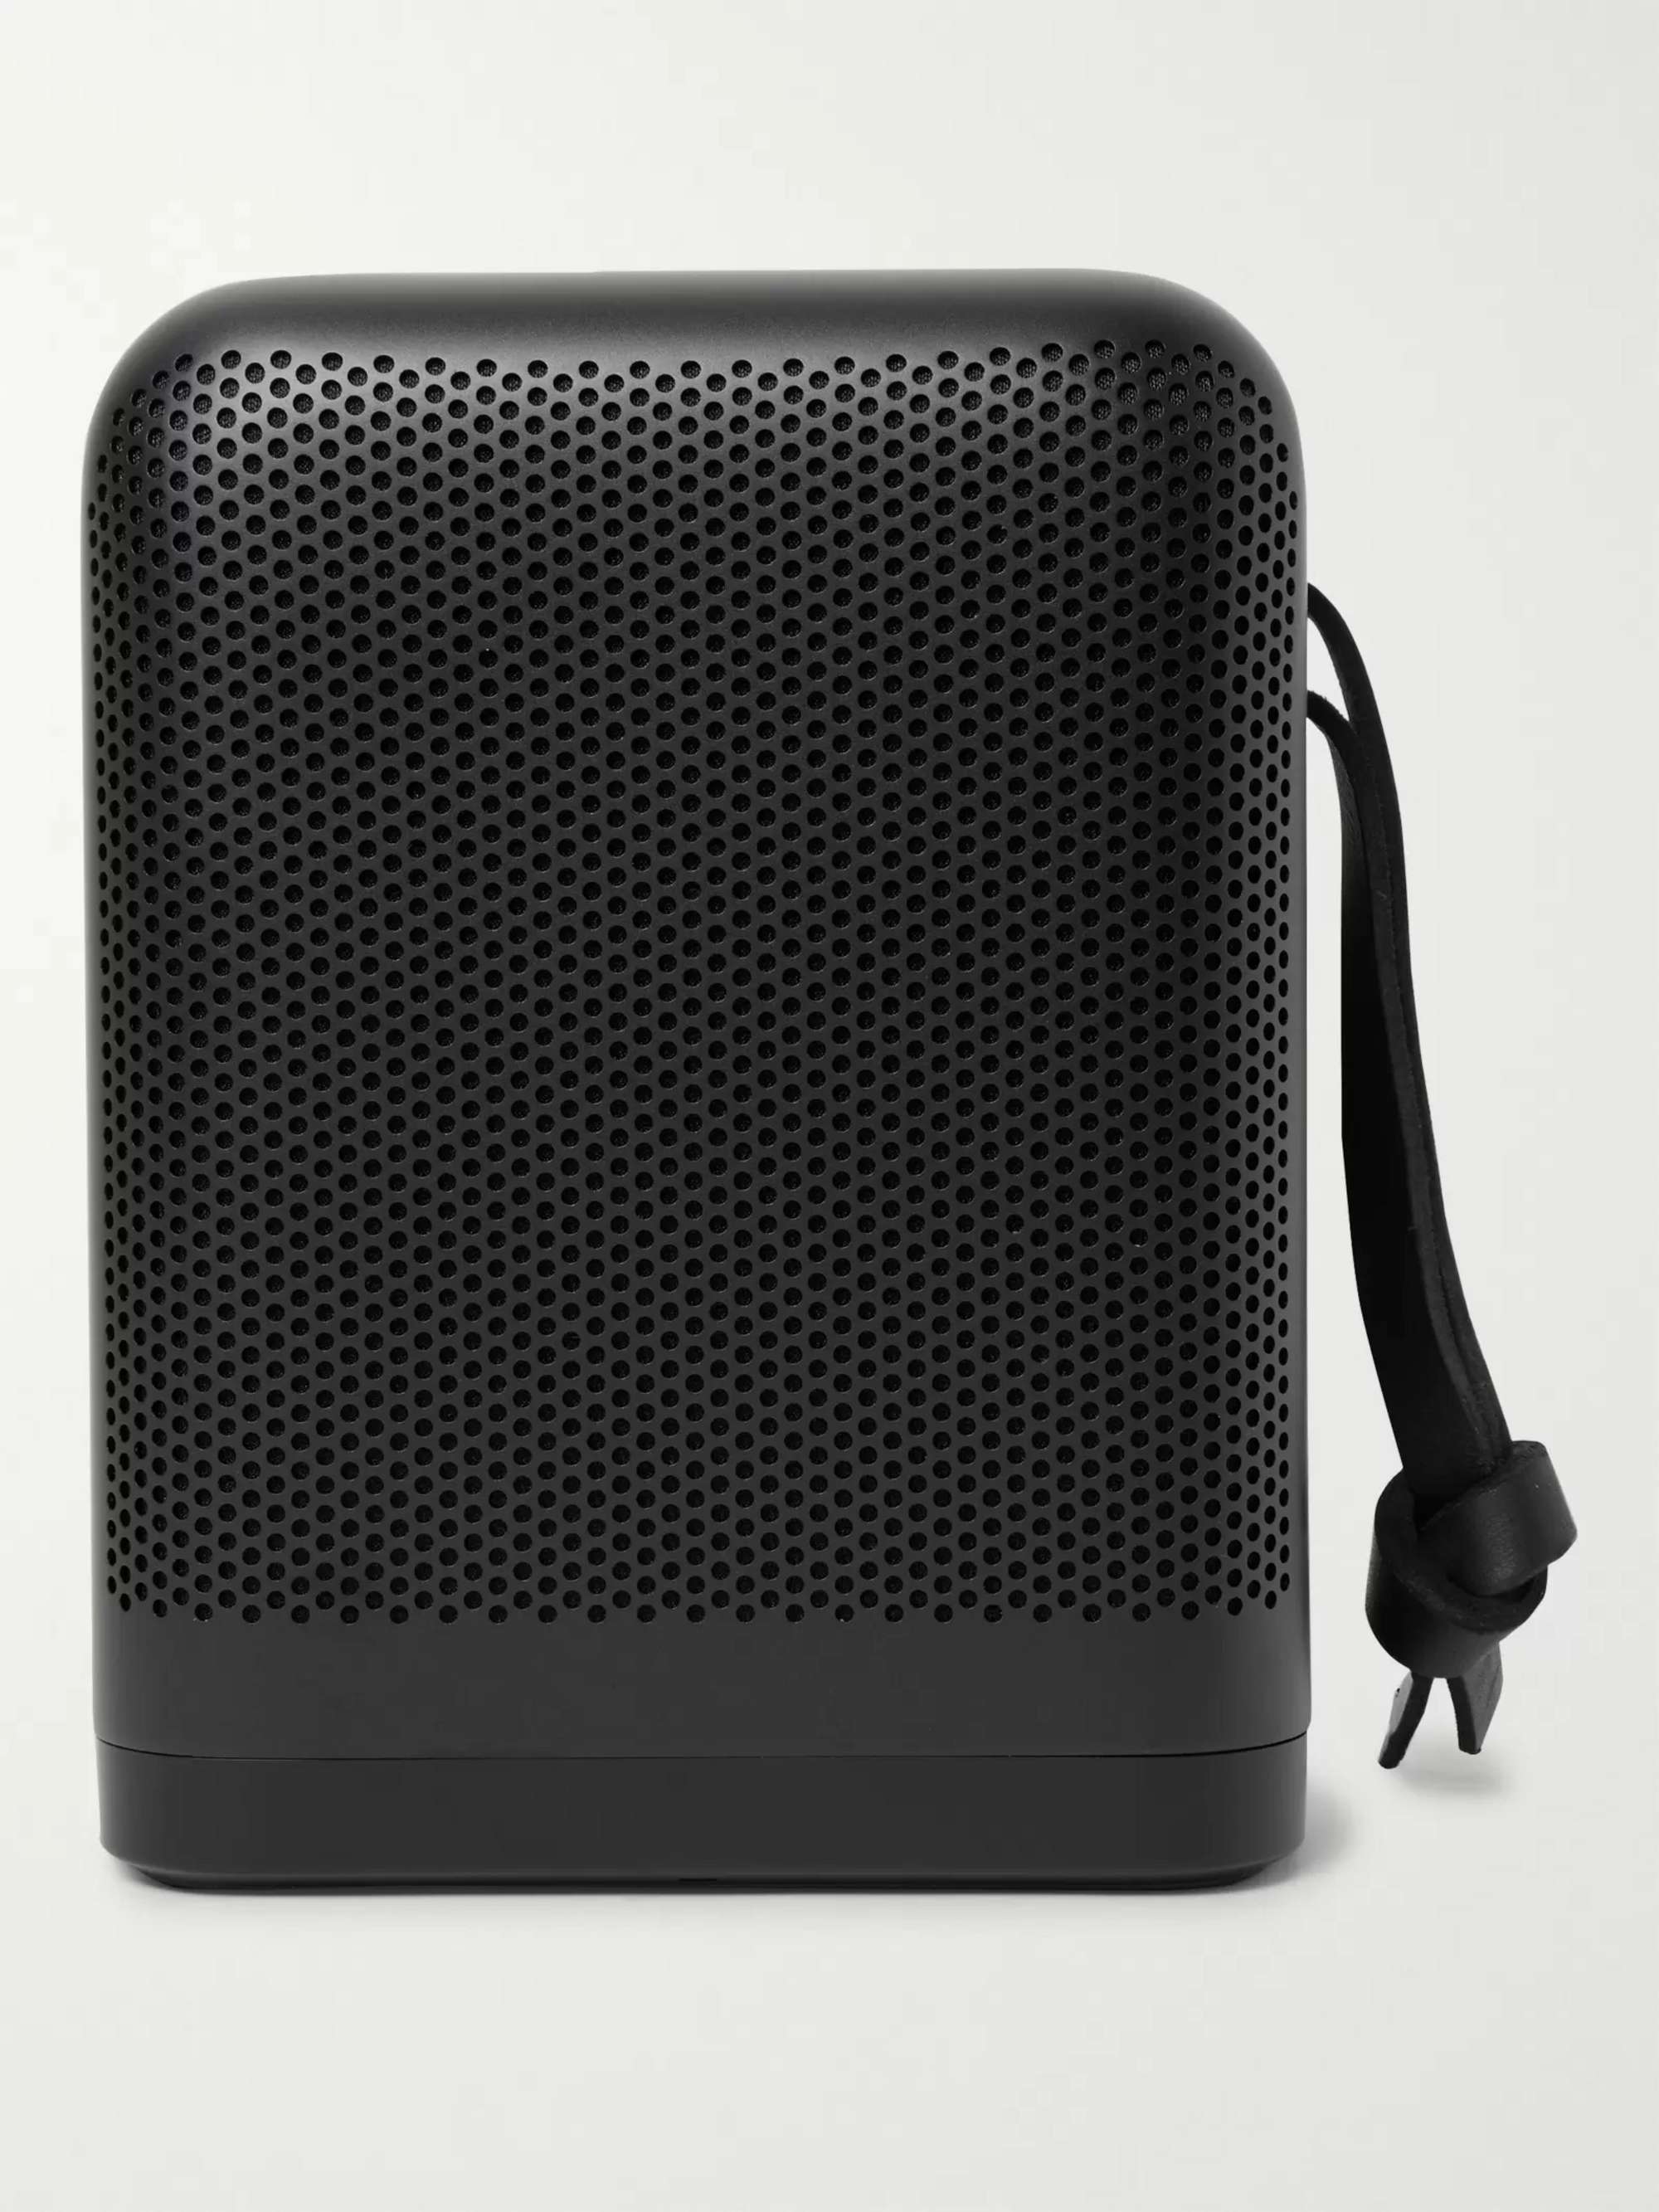 BeoPlay P6 Portable Bluetooth Speaker